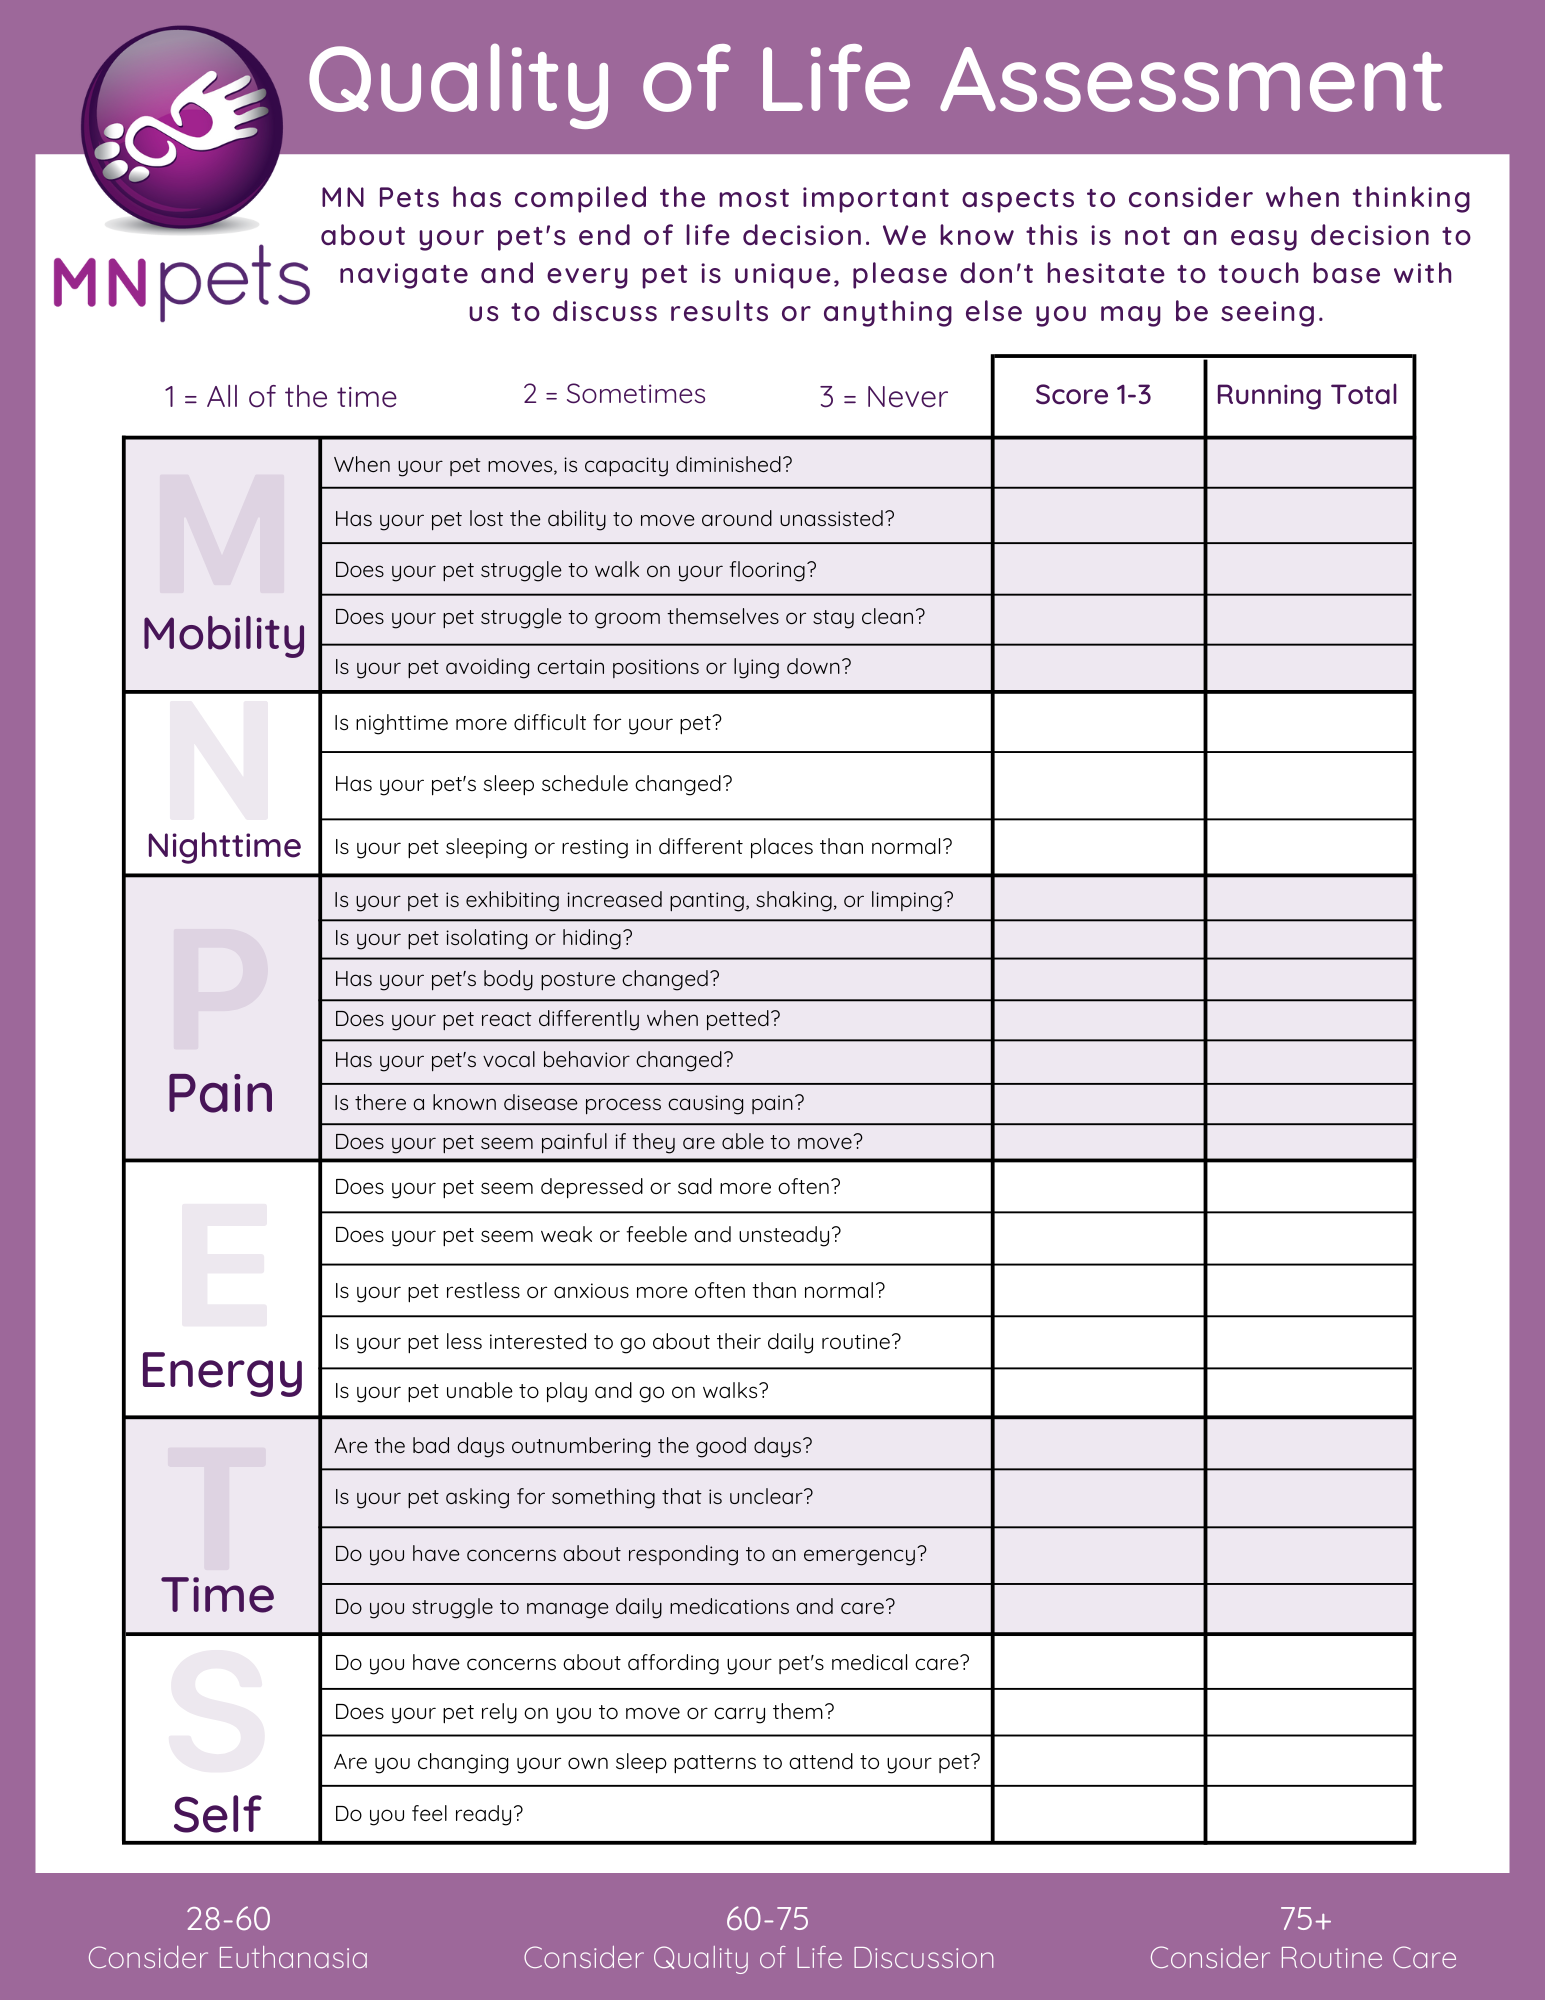 MN Pets Quality Of Life Assessment Tool 